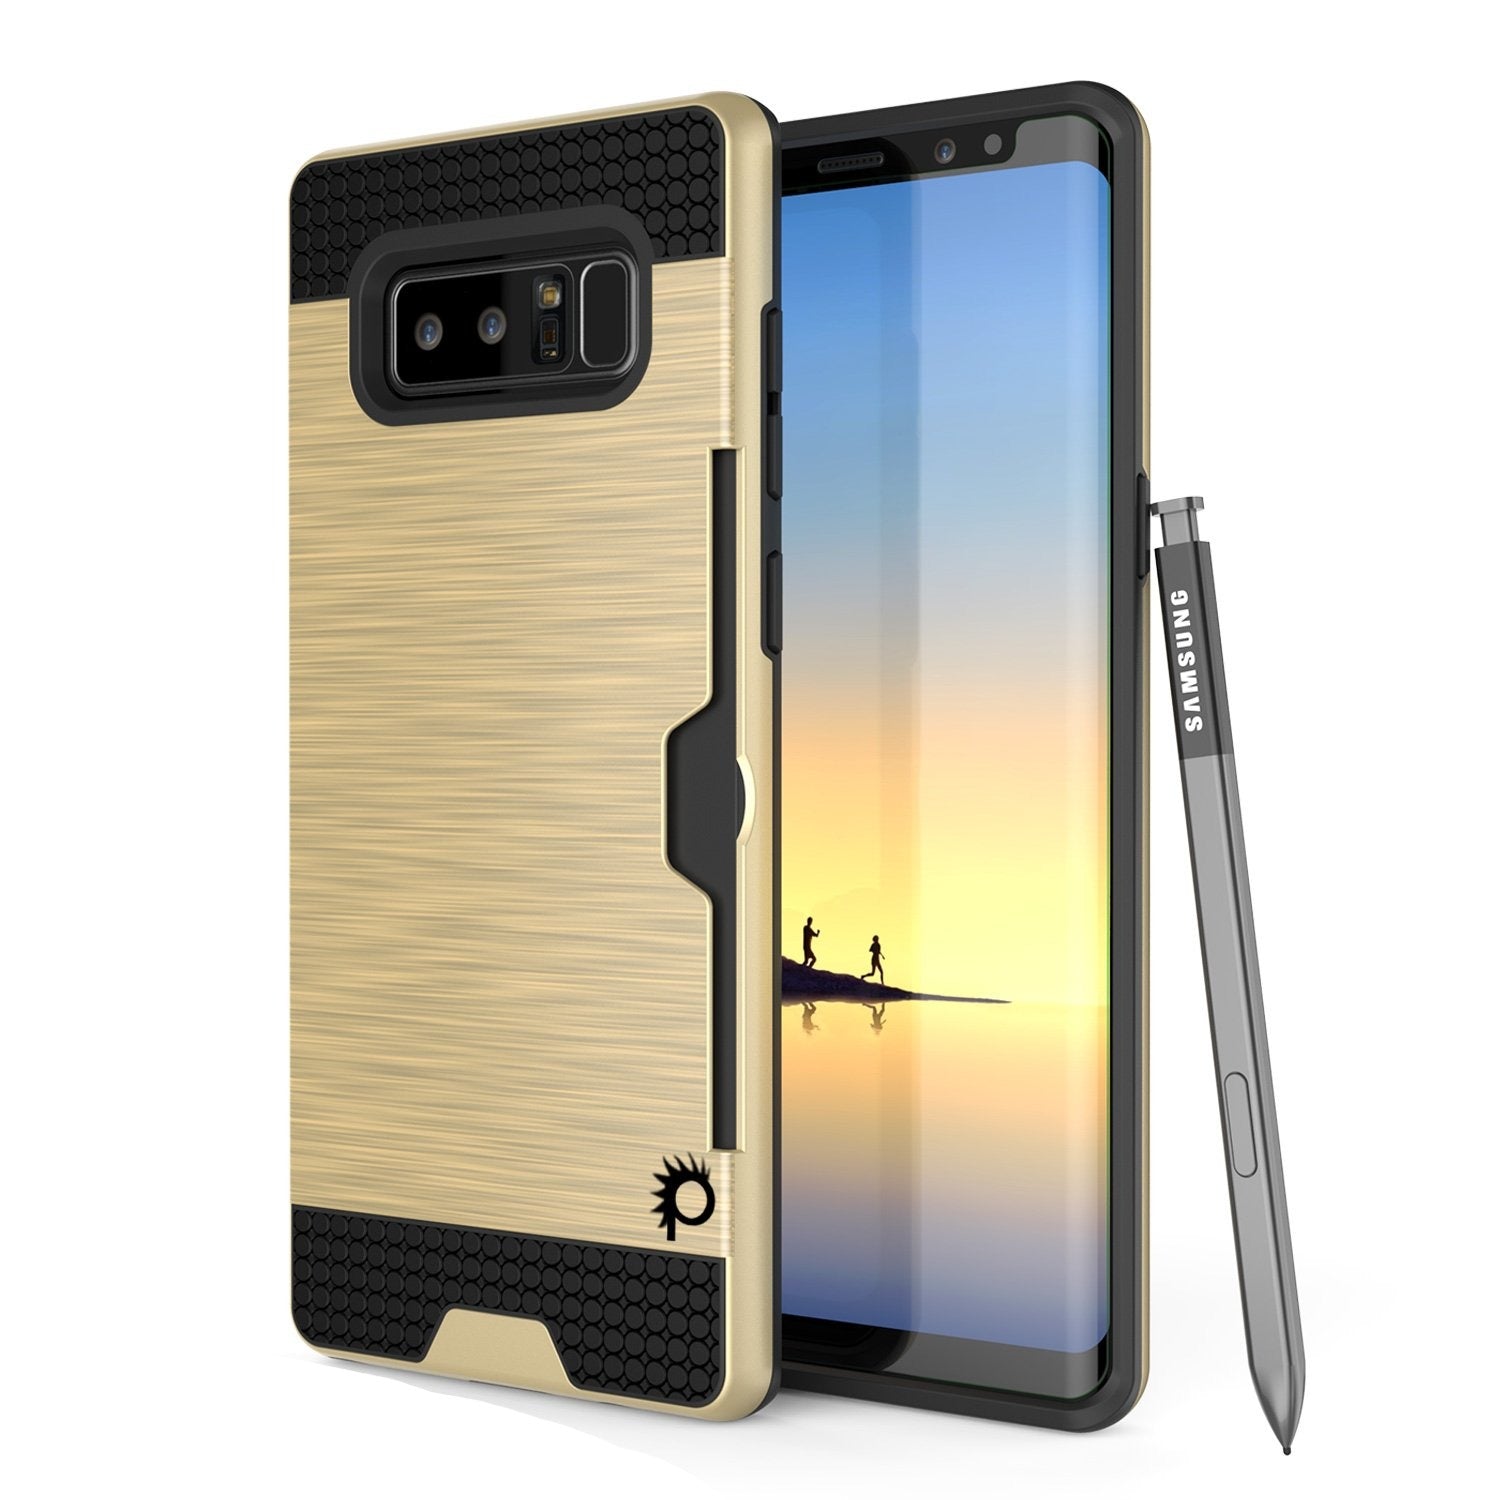 Galaxy Note 8 Case, PUNKcase [SLOT Series] Slim Fit for Samsung Note 8 [Gold]